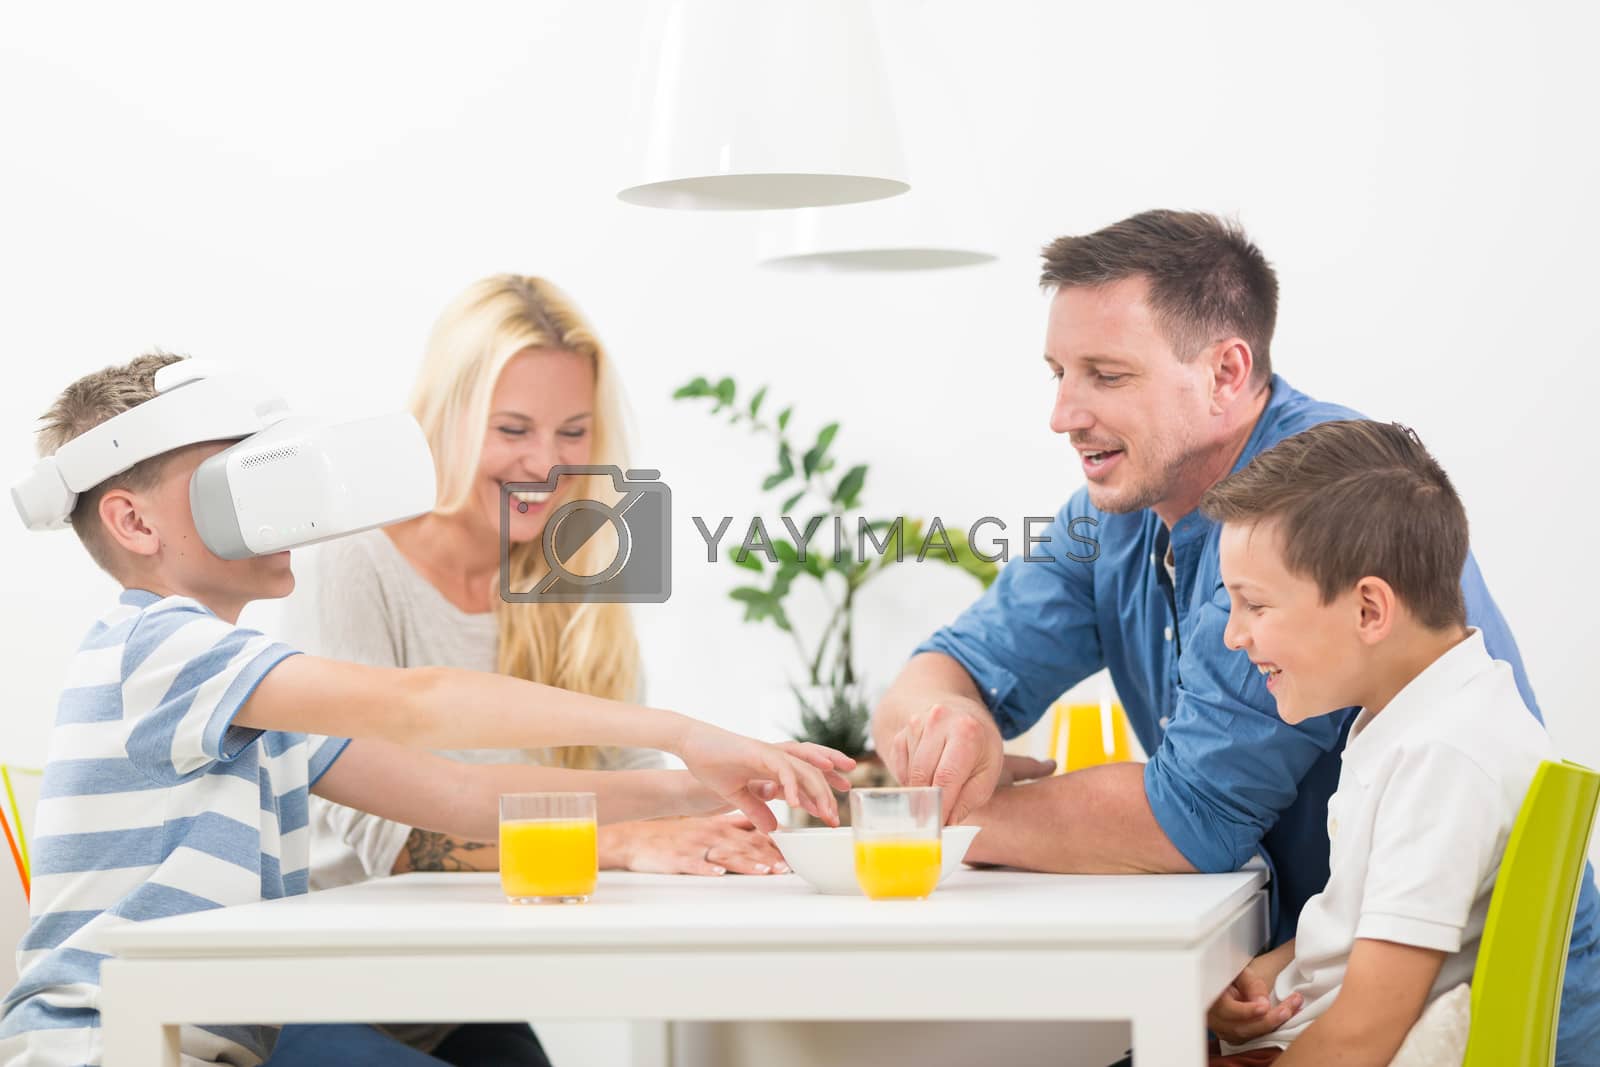 Royalty free image of Happy family at home on living room sofa having fun playing games using virtual reality headset by kasto